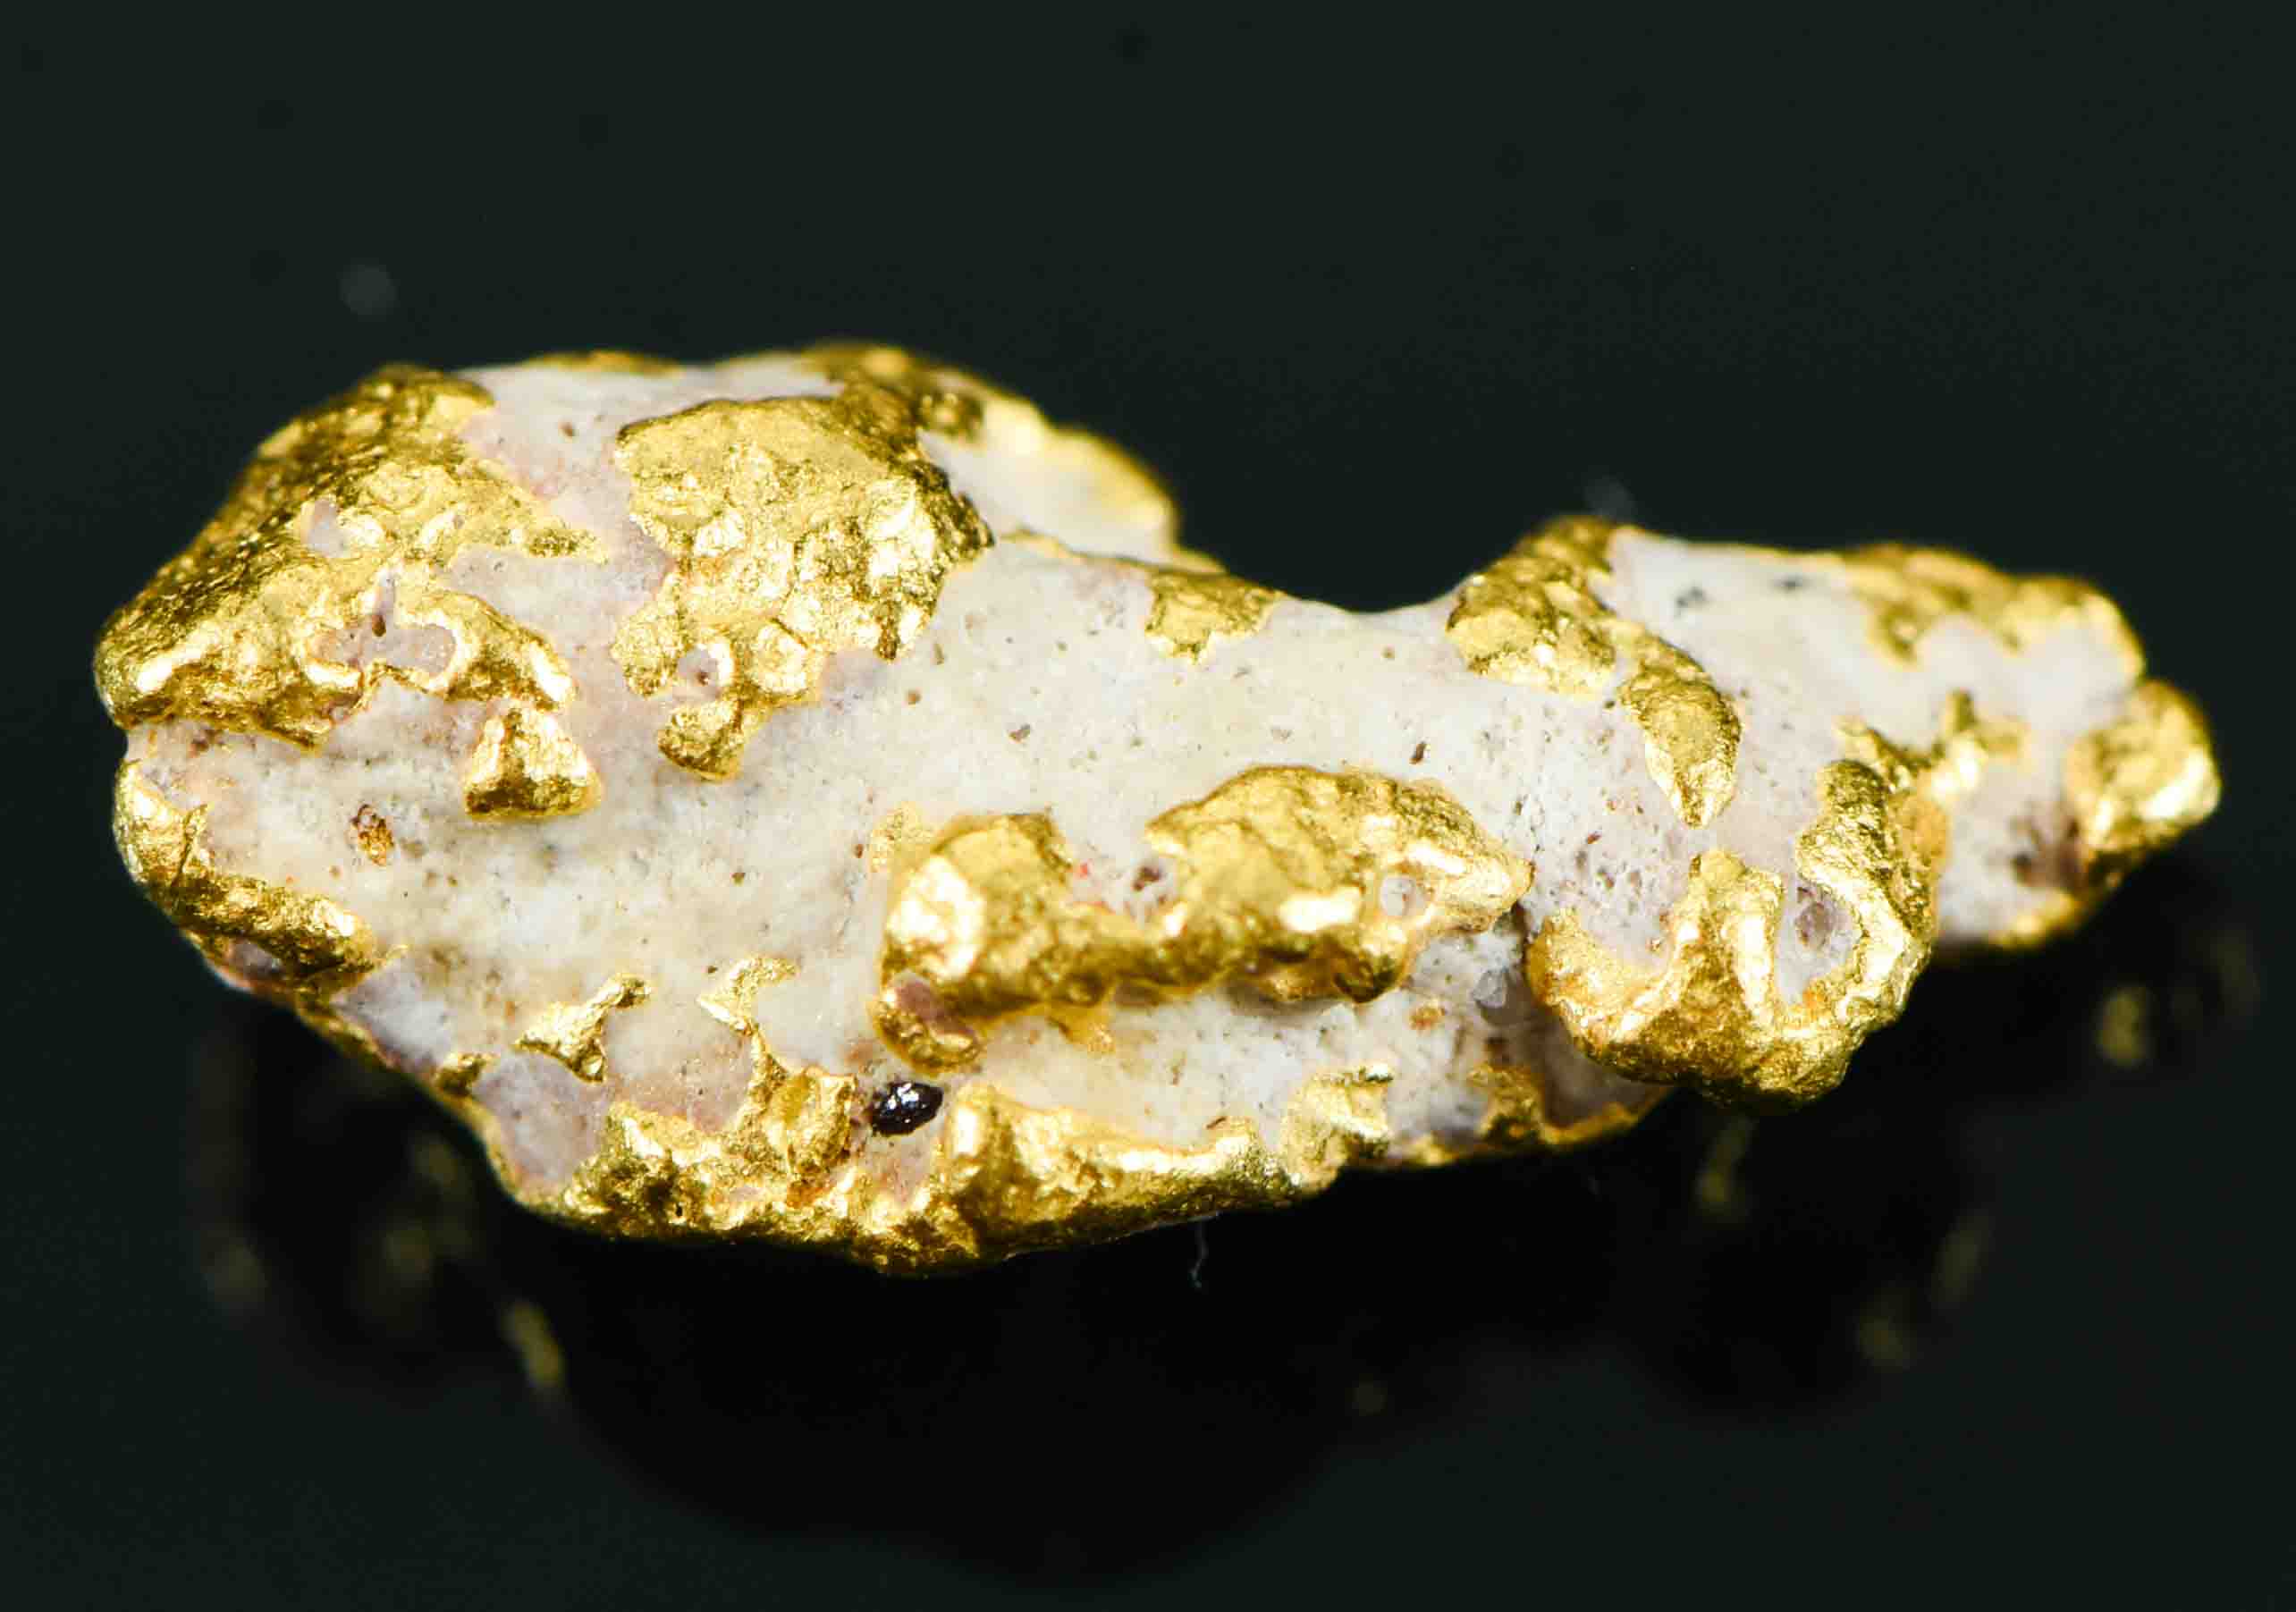 #35 Australian Natural Gold Nugget With Quartz Weighs 1.78 Grams.